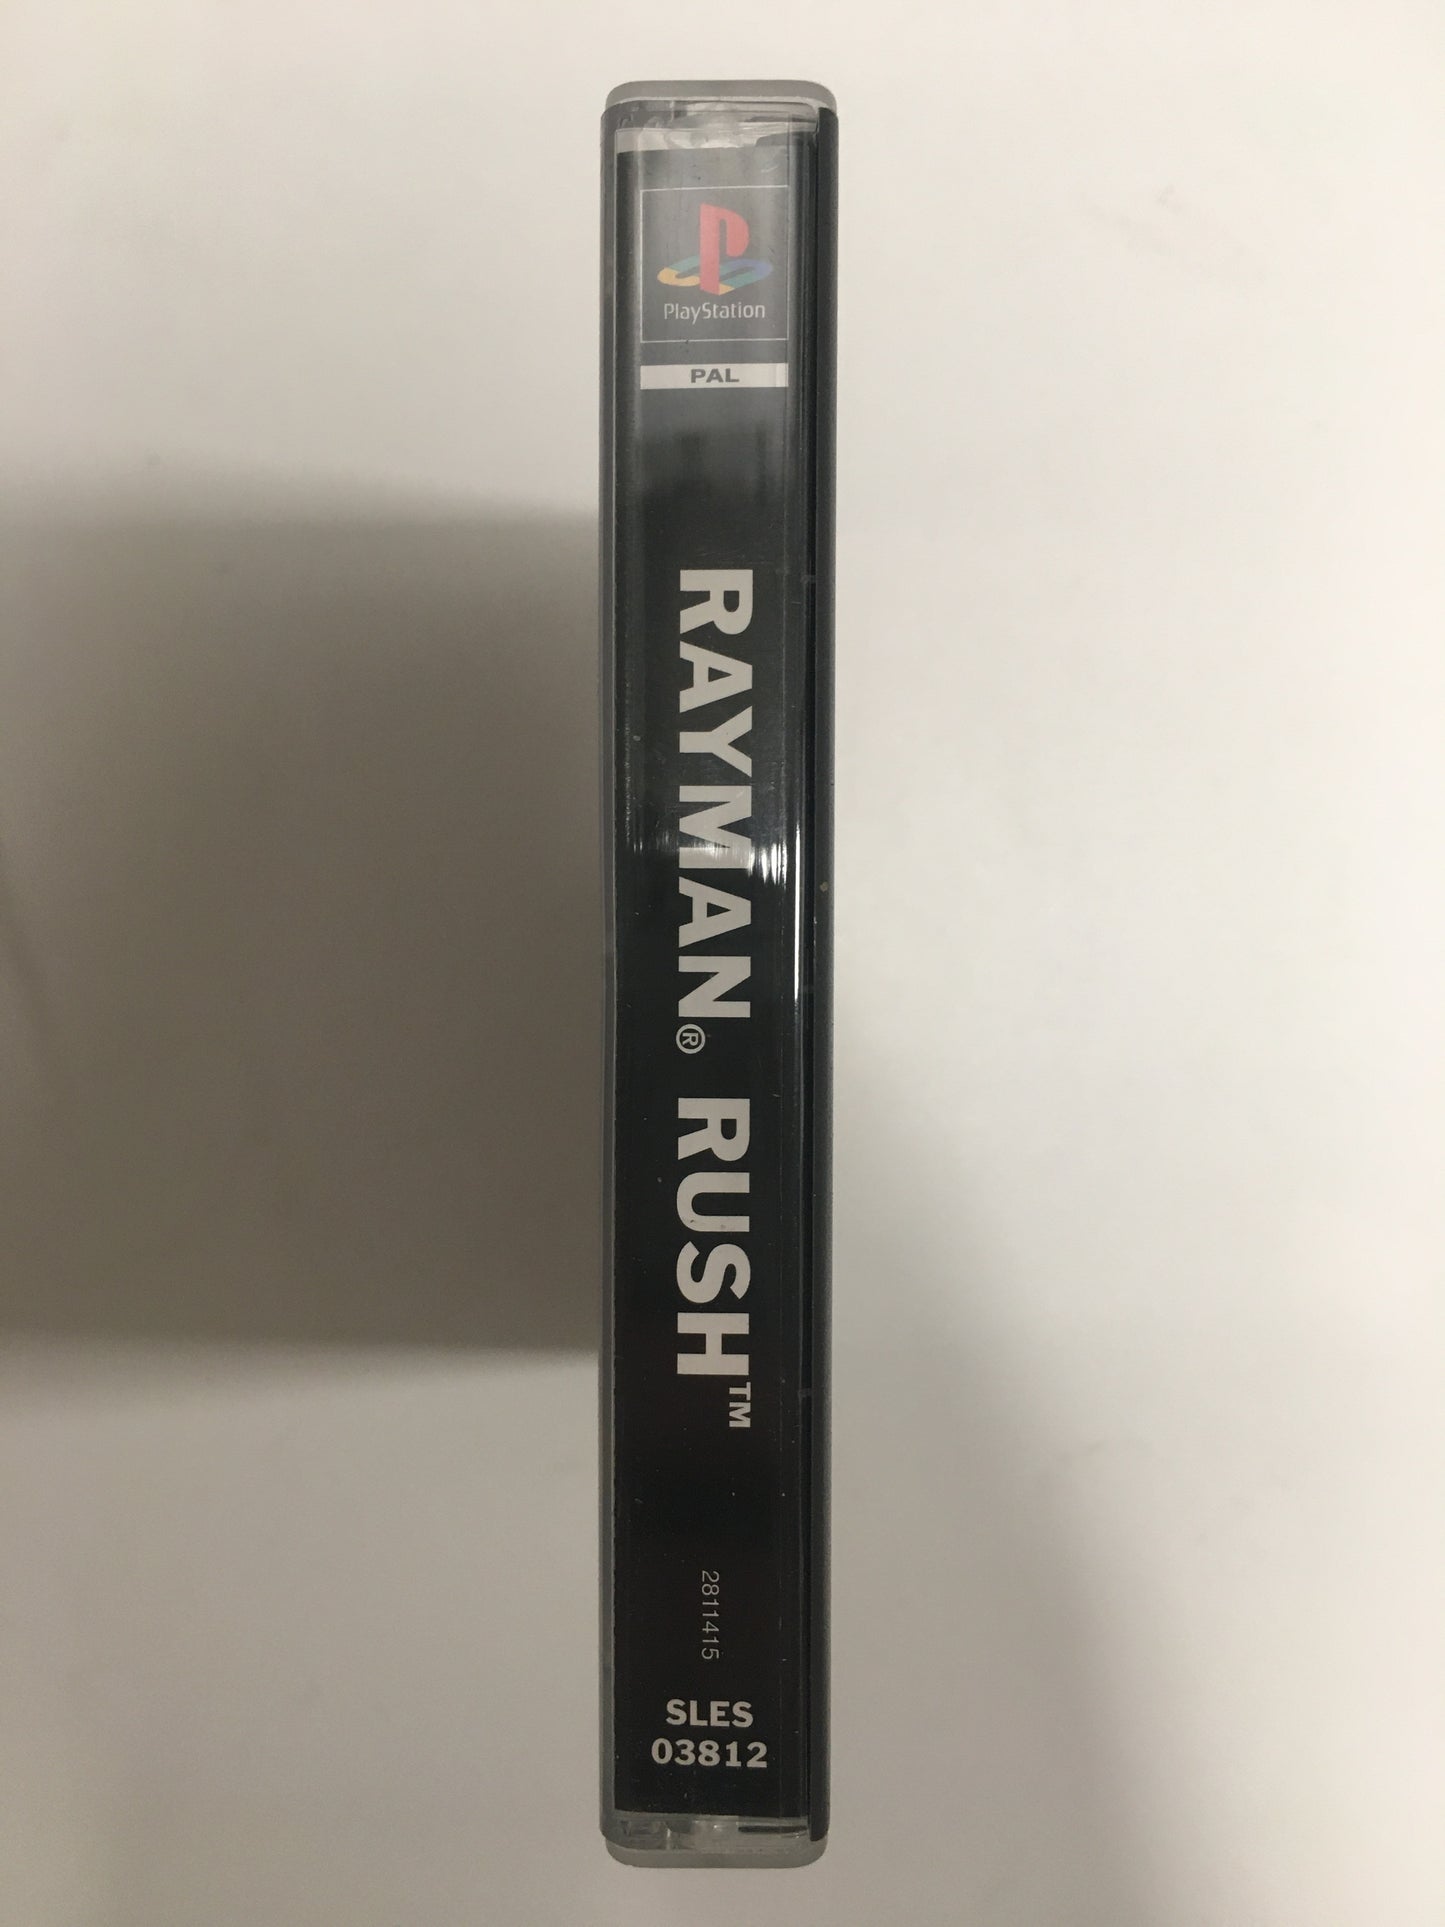 Rayman rush Sony Ps1 complet